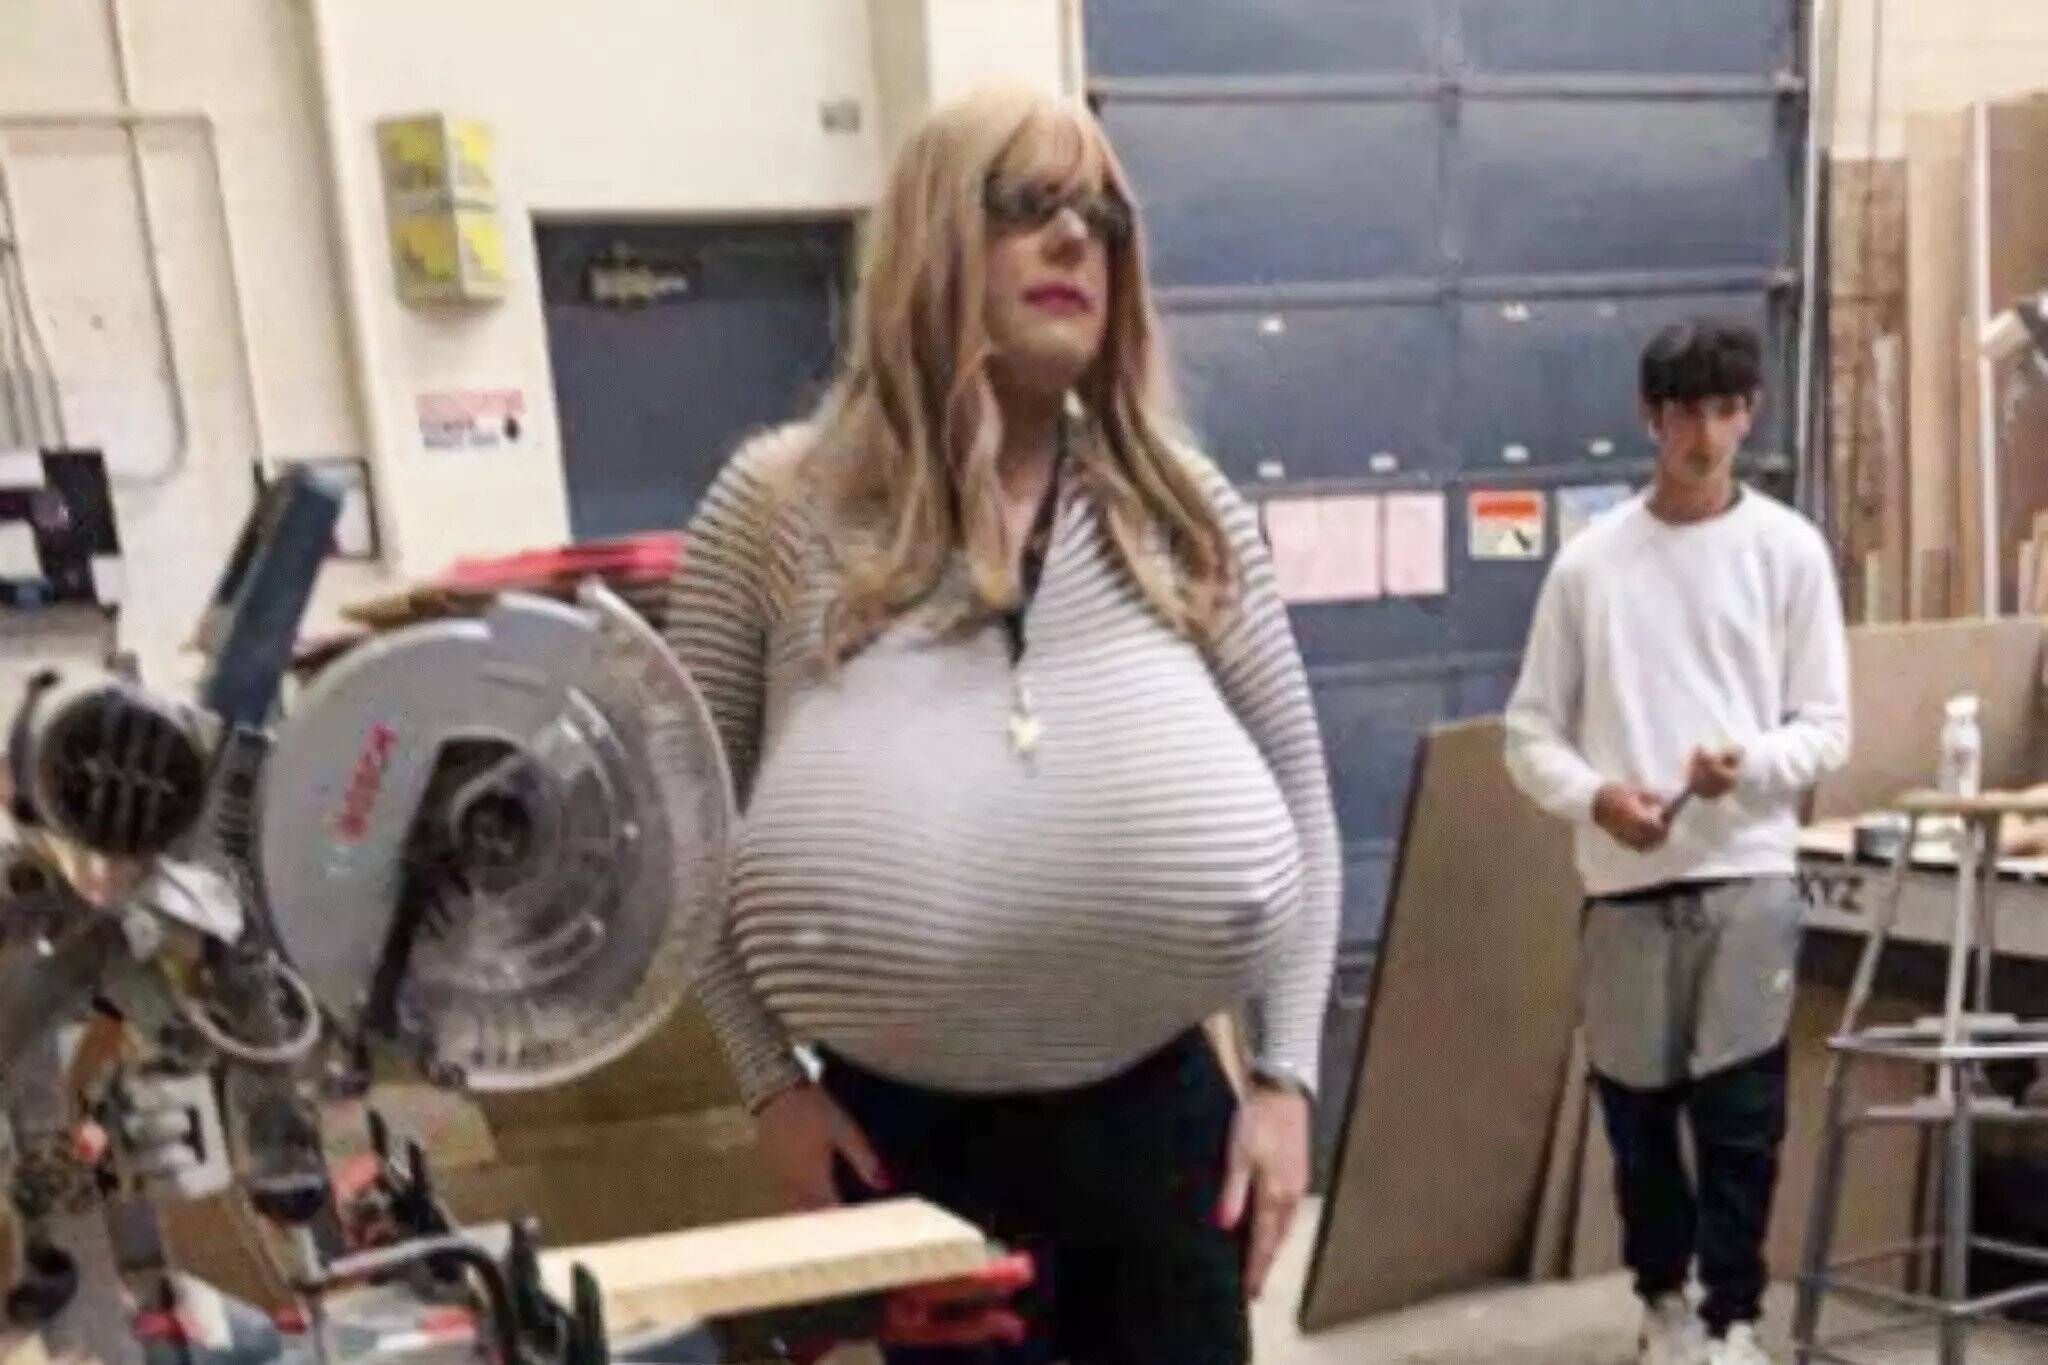 Big Tits Tits At School - Students warned not to take photos of Oakville teacher who wears huge  prosthetic breasts